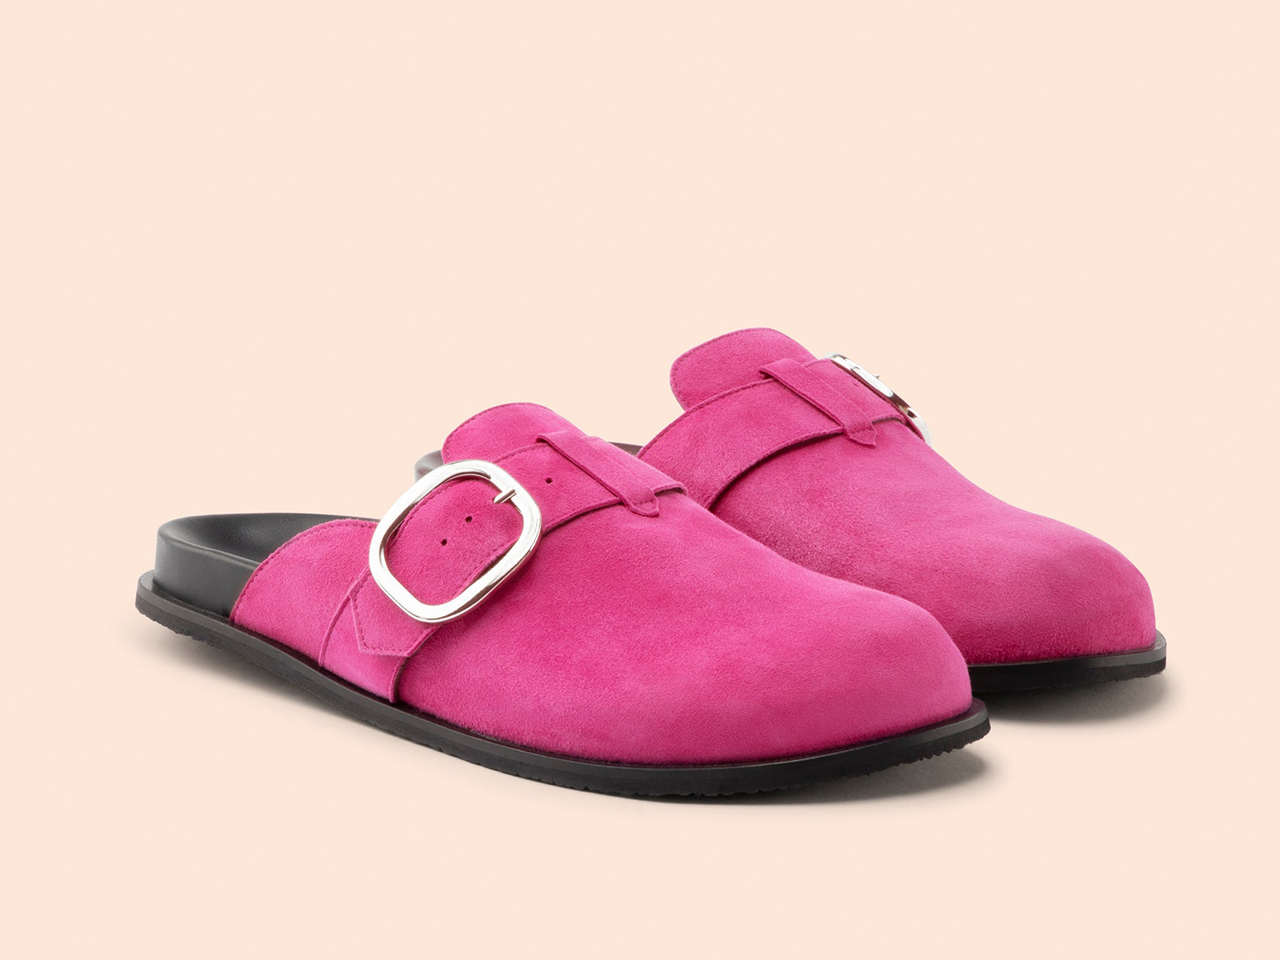 A pair of suede hot pink clogs with big silver buckles from Maguire.